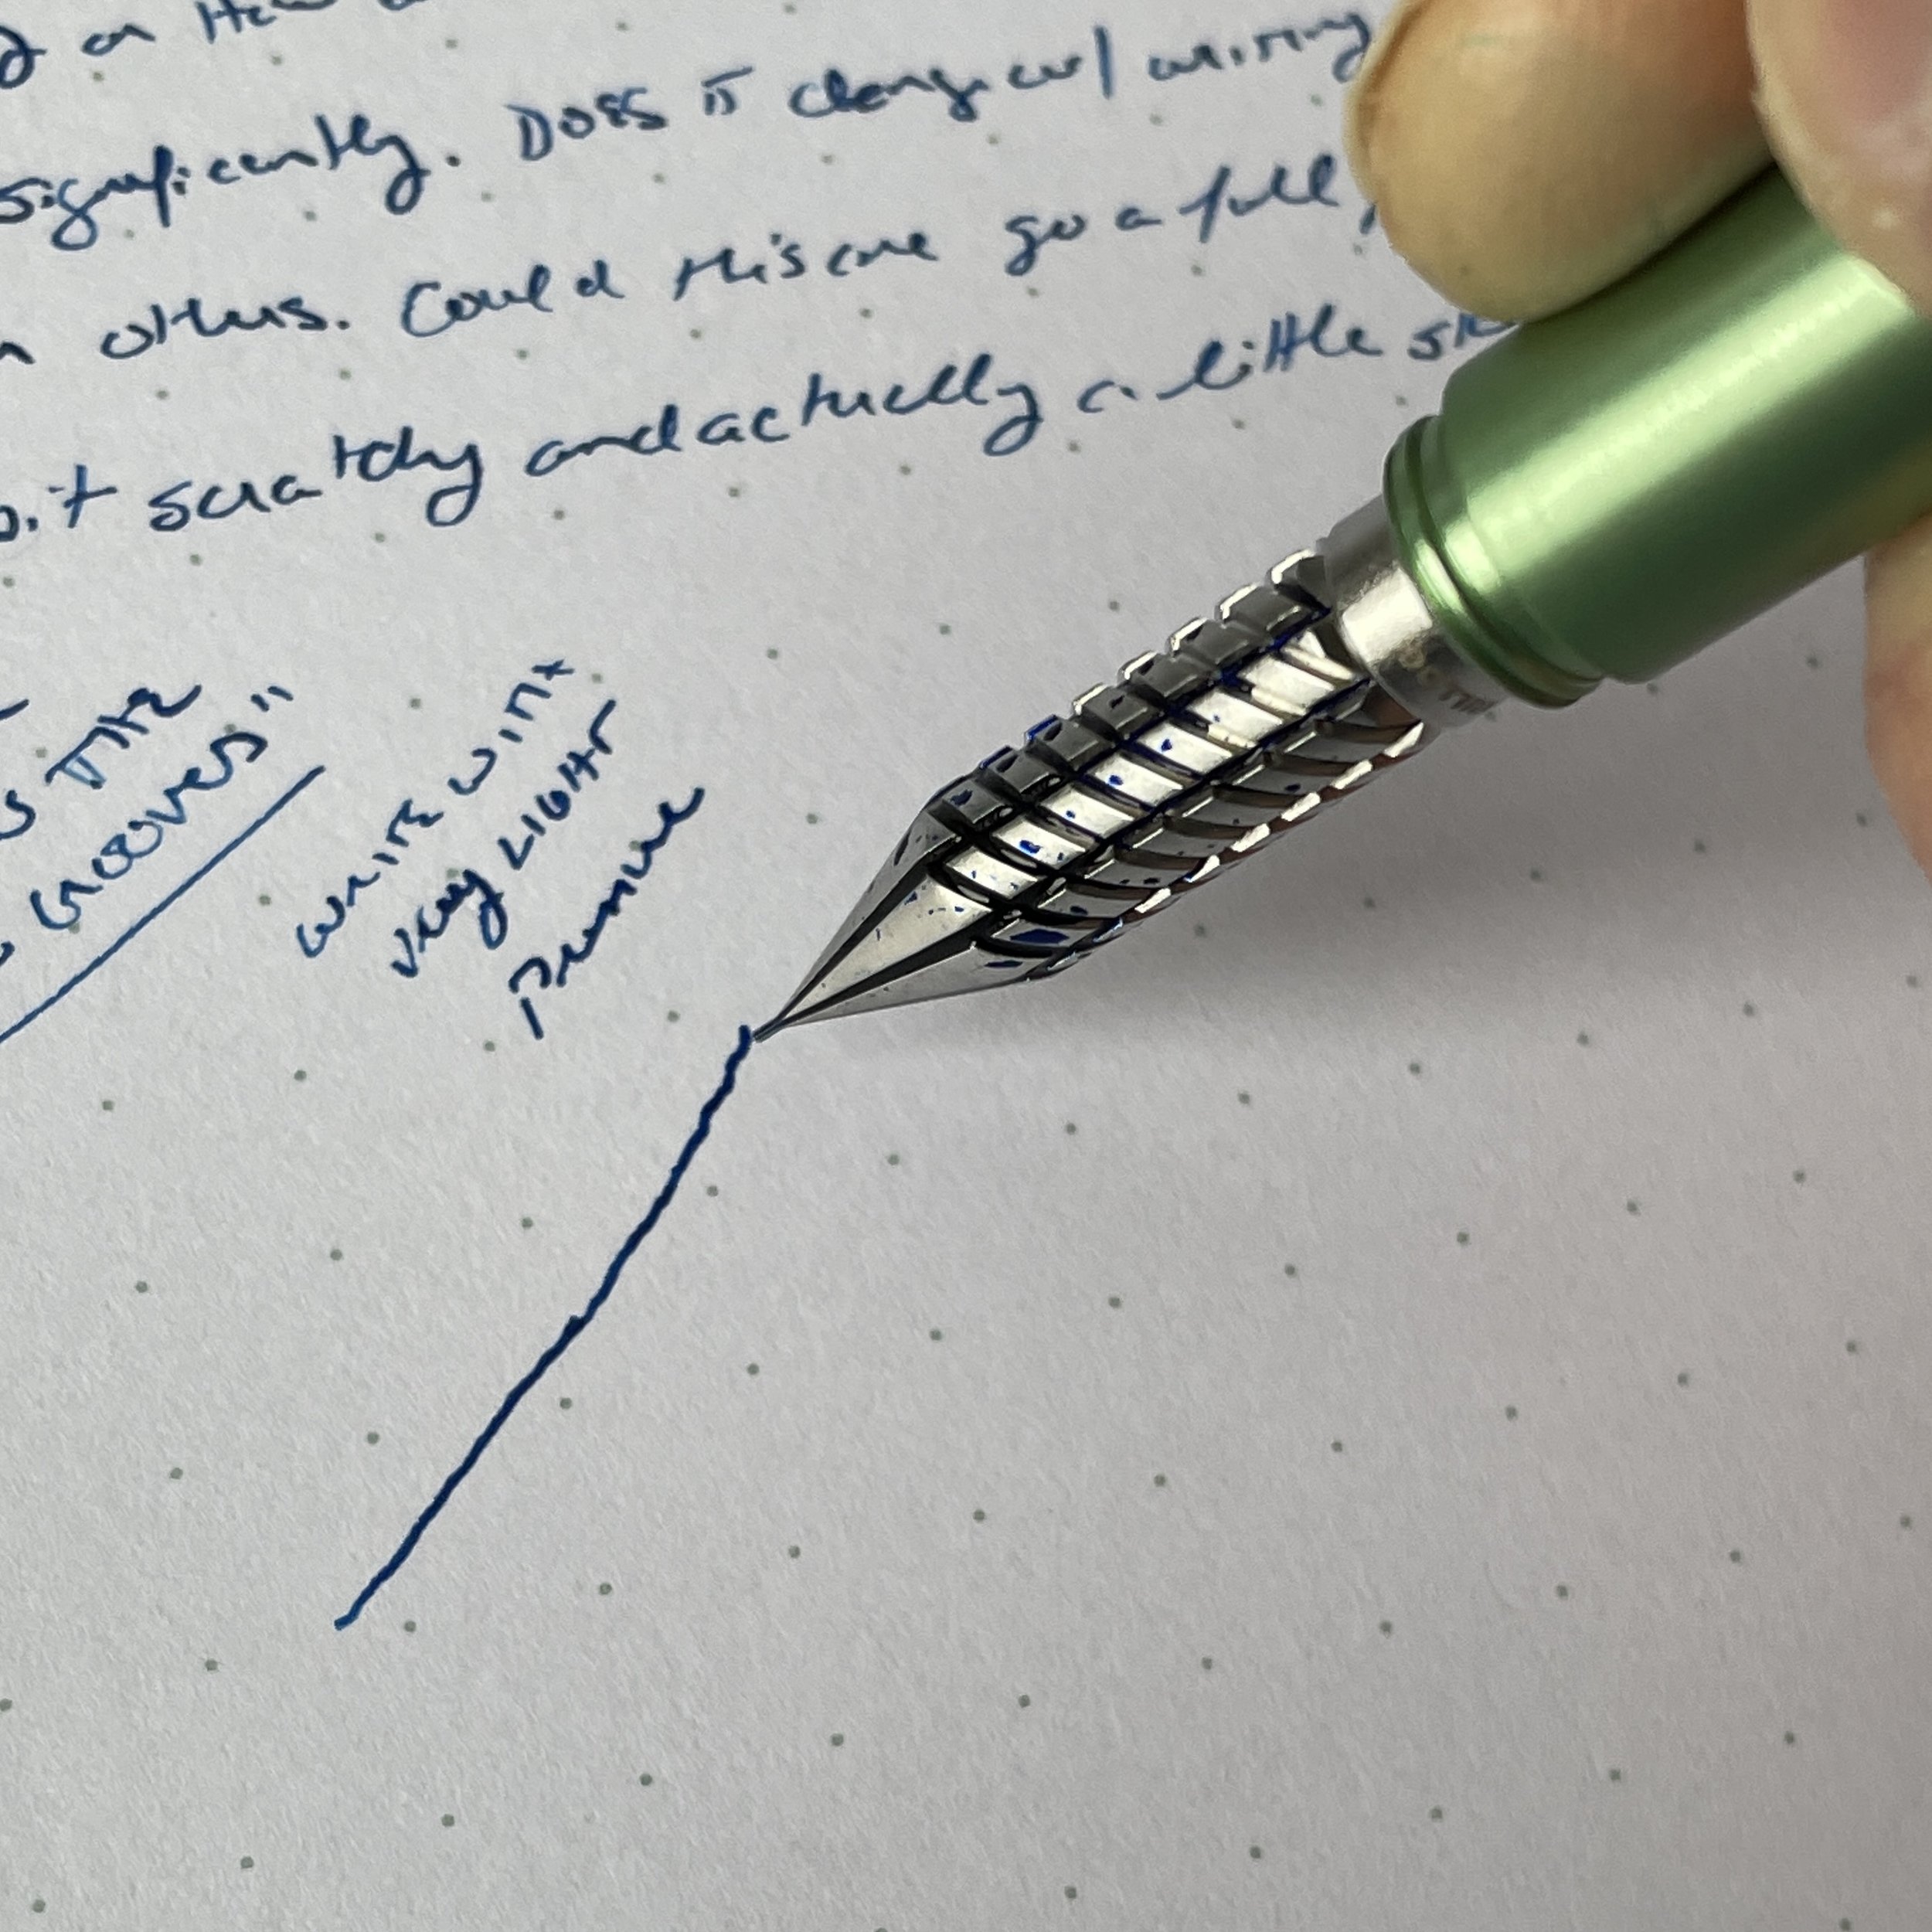 My Experience with the Drillog Metal Dip Pen: Hype vs. Reality